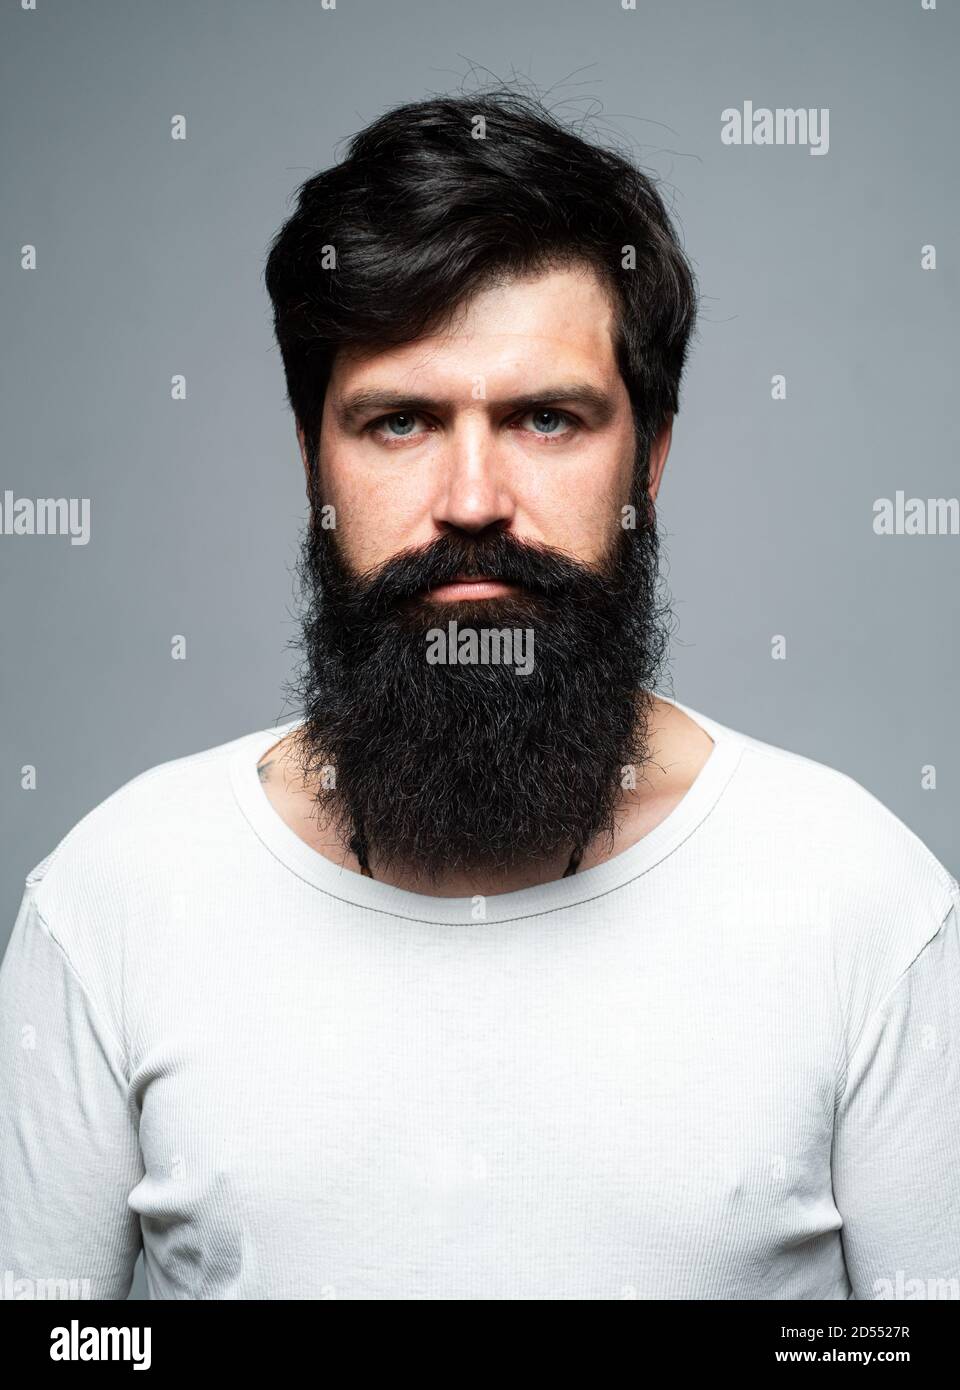 Barber with long beard and moustache in barbershop. Bearded man Stock Photo  - Alamy